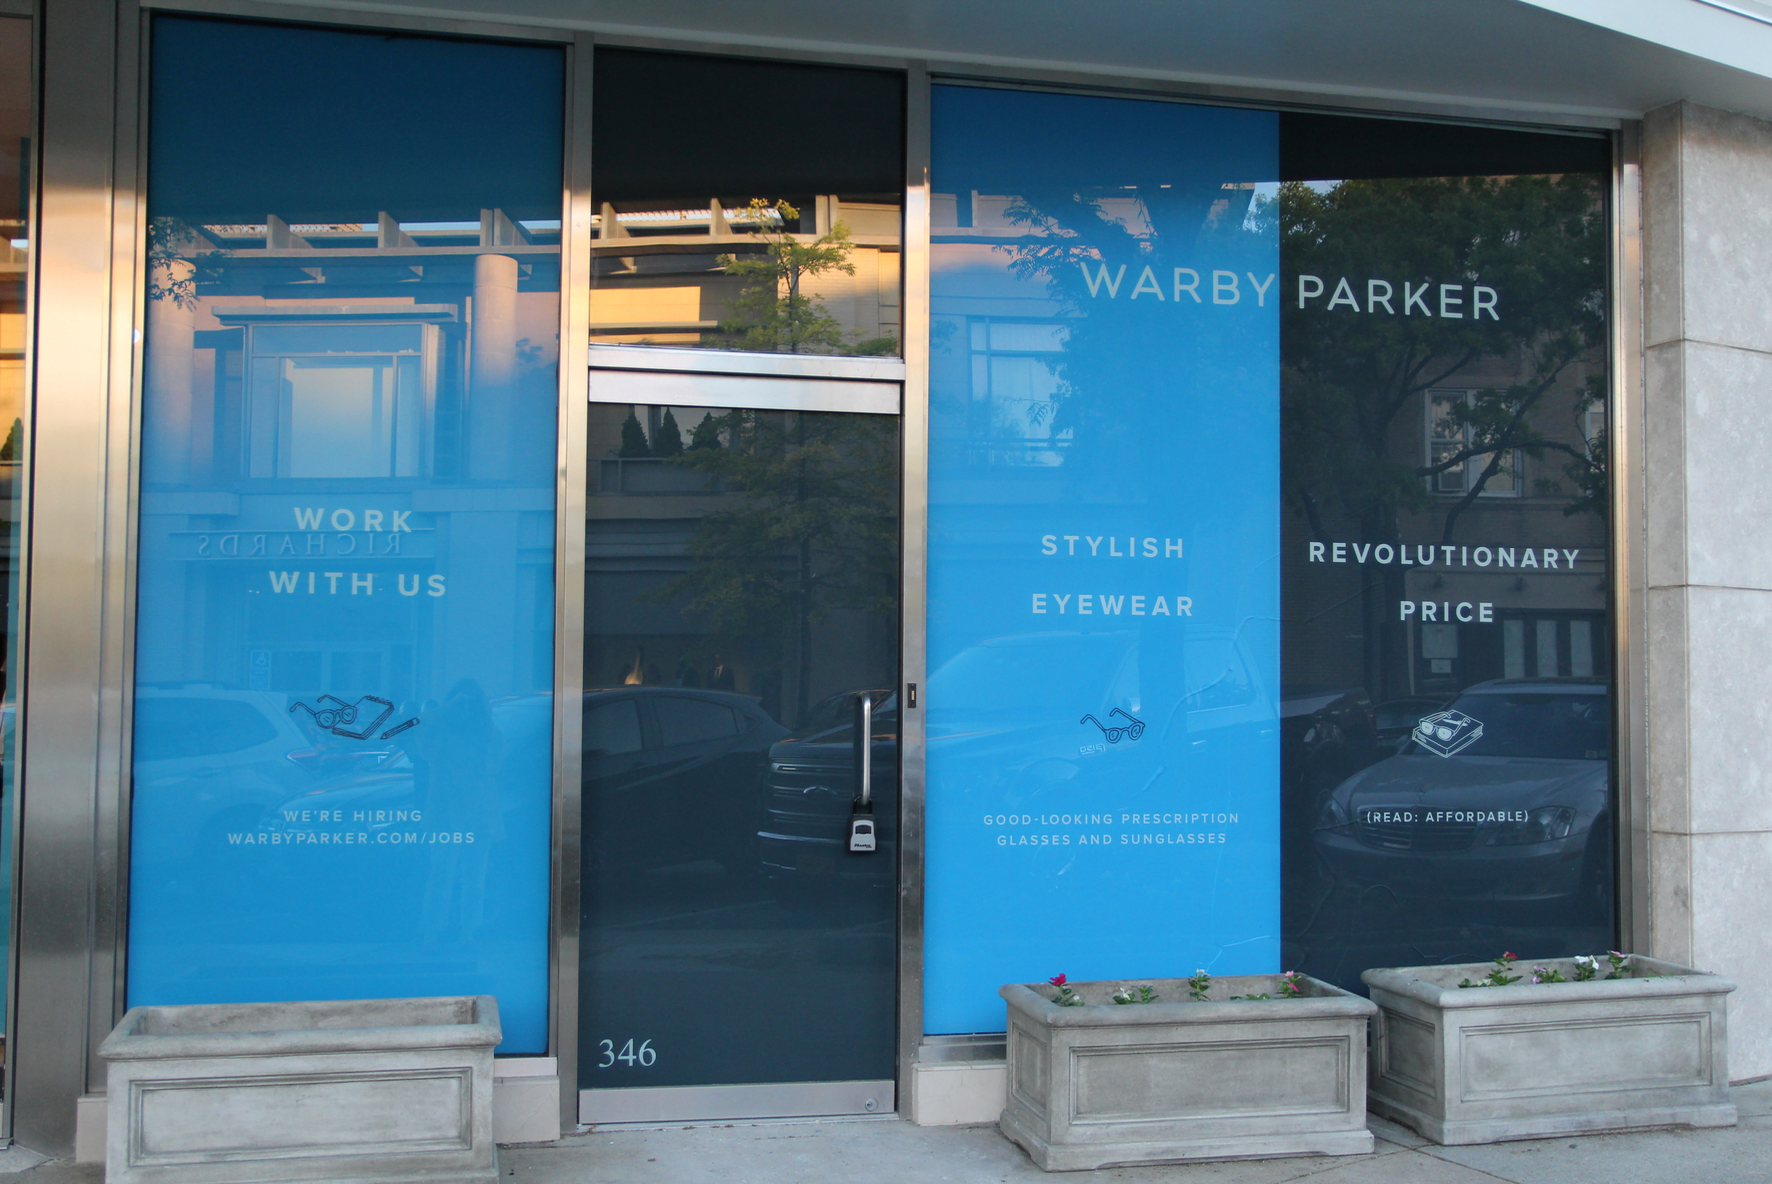 Another newcomer to the Avenue will soon be Warby Parker, who sell eyeglasses, sunglasses and more at 346 Greenwich Avenue. 